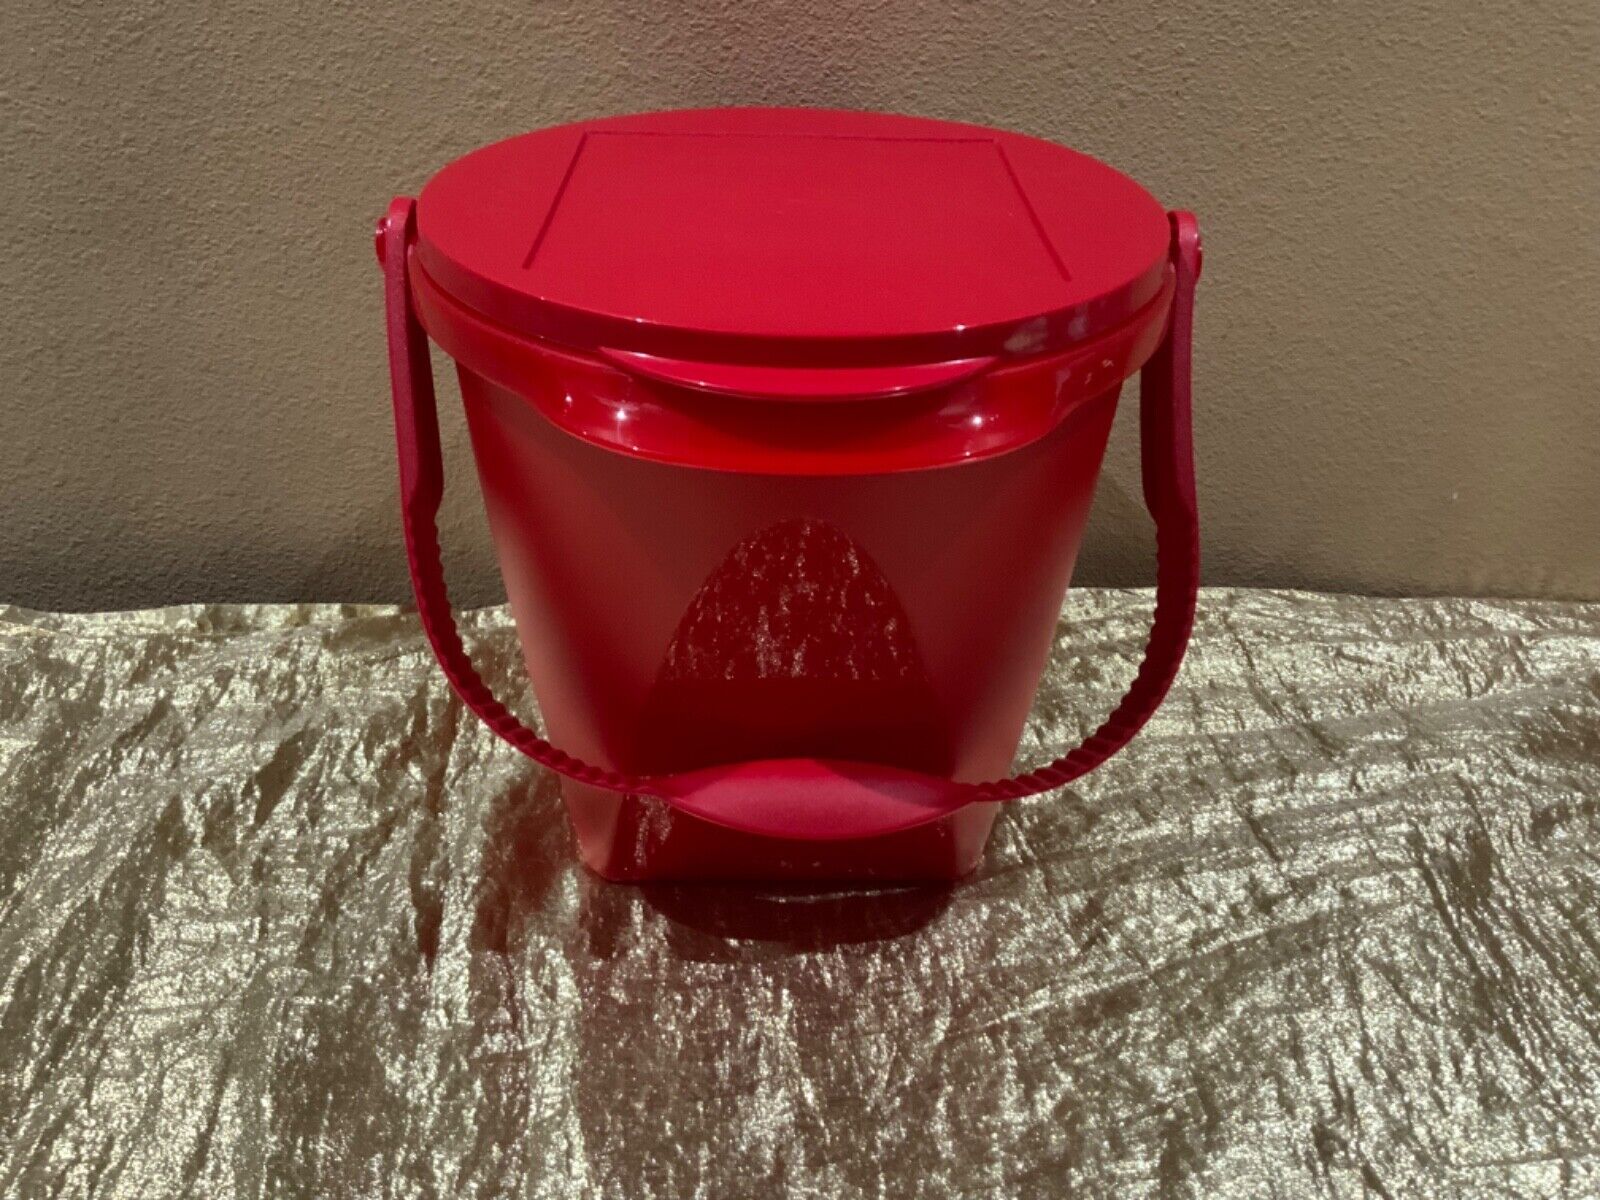 New UNIQUE Beautiful Round Tupperware Bucket/Container 5L Candy Apple Red Color